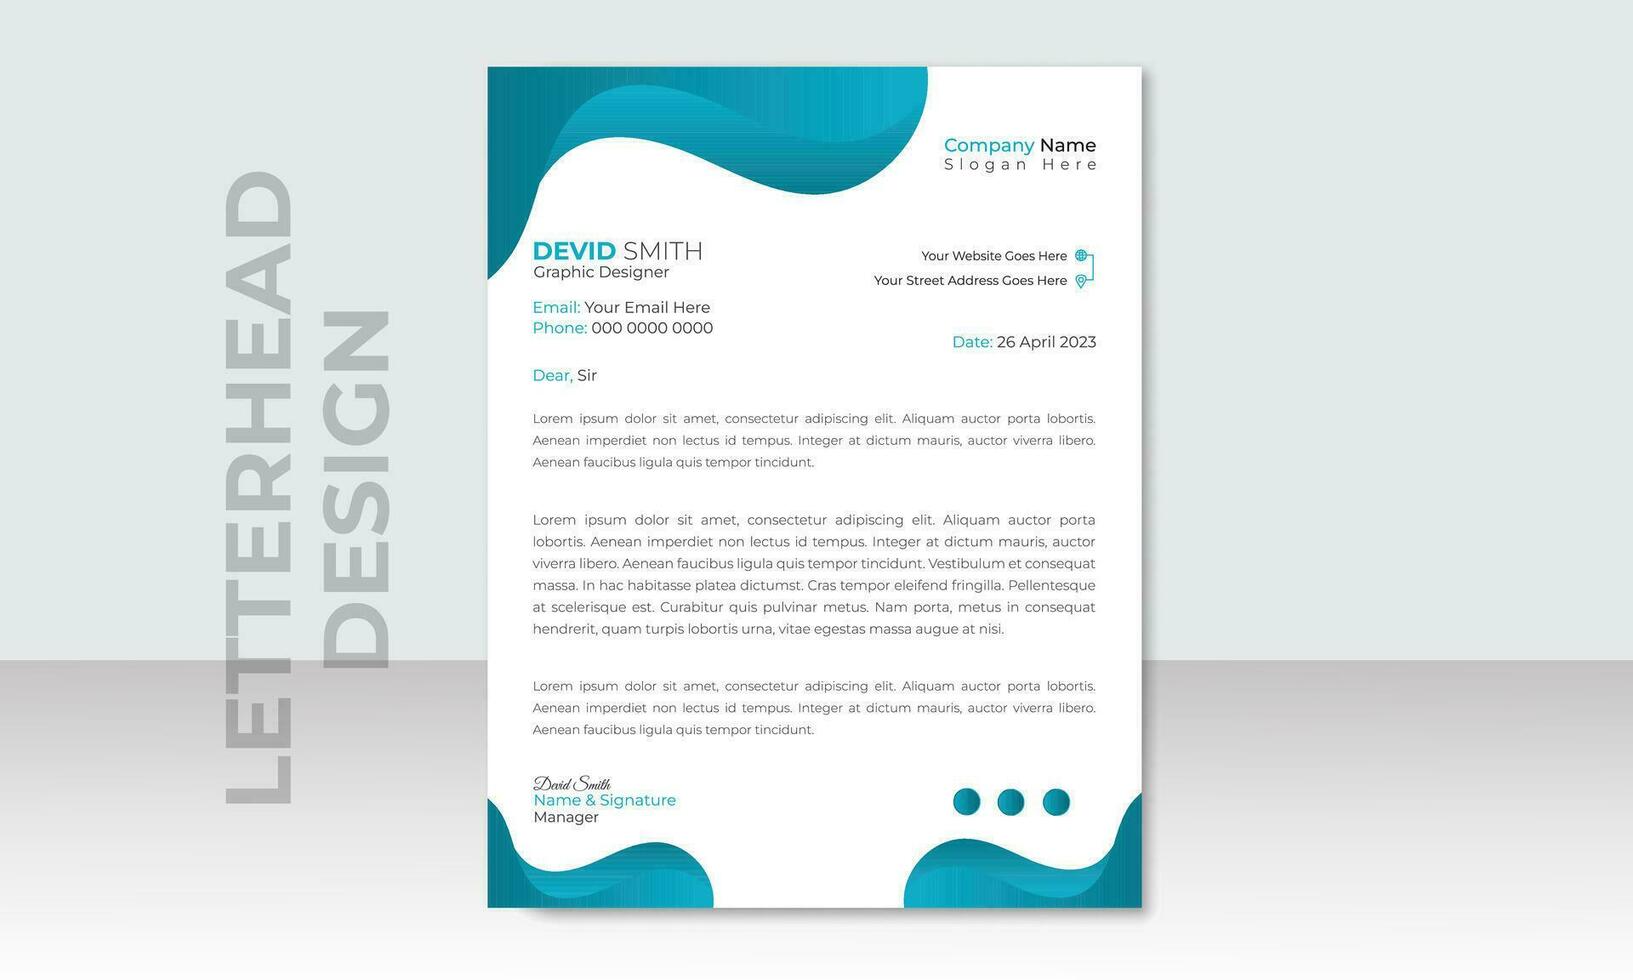 official minimal creative abstract professional newsletter corporate modern business proposal letterhead design template. vector